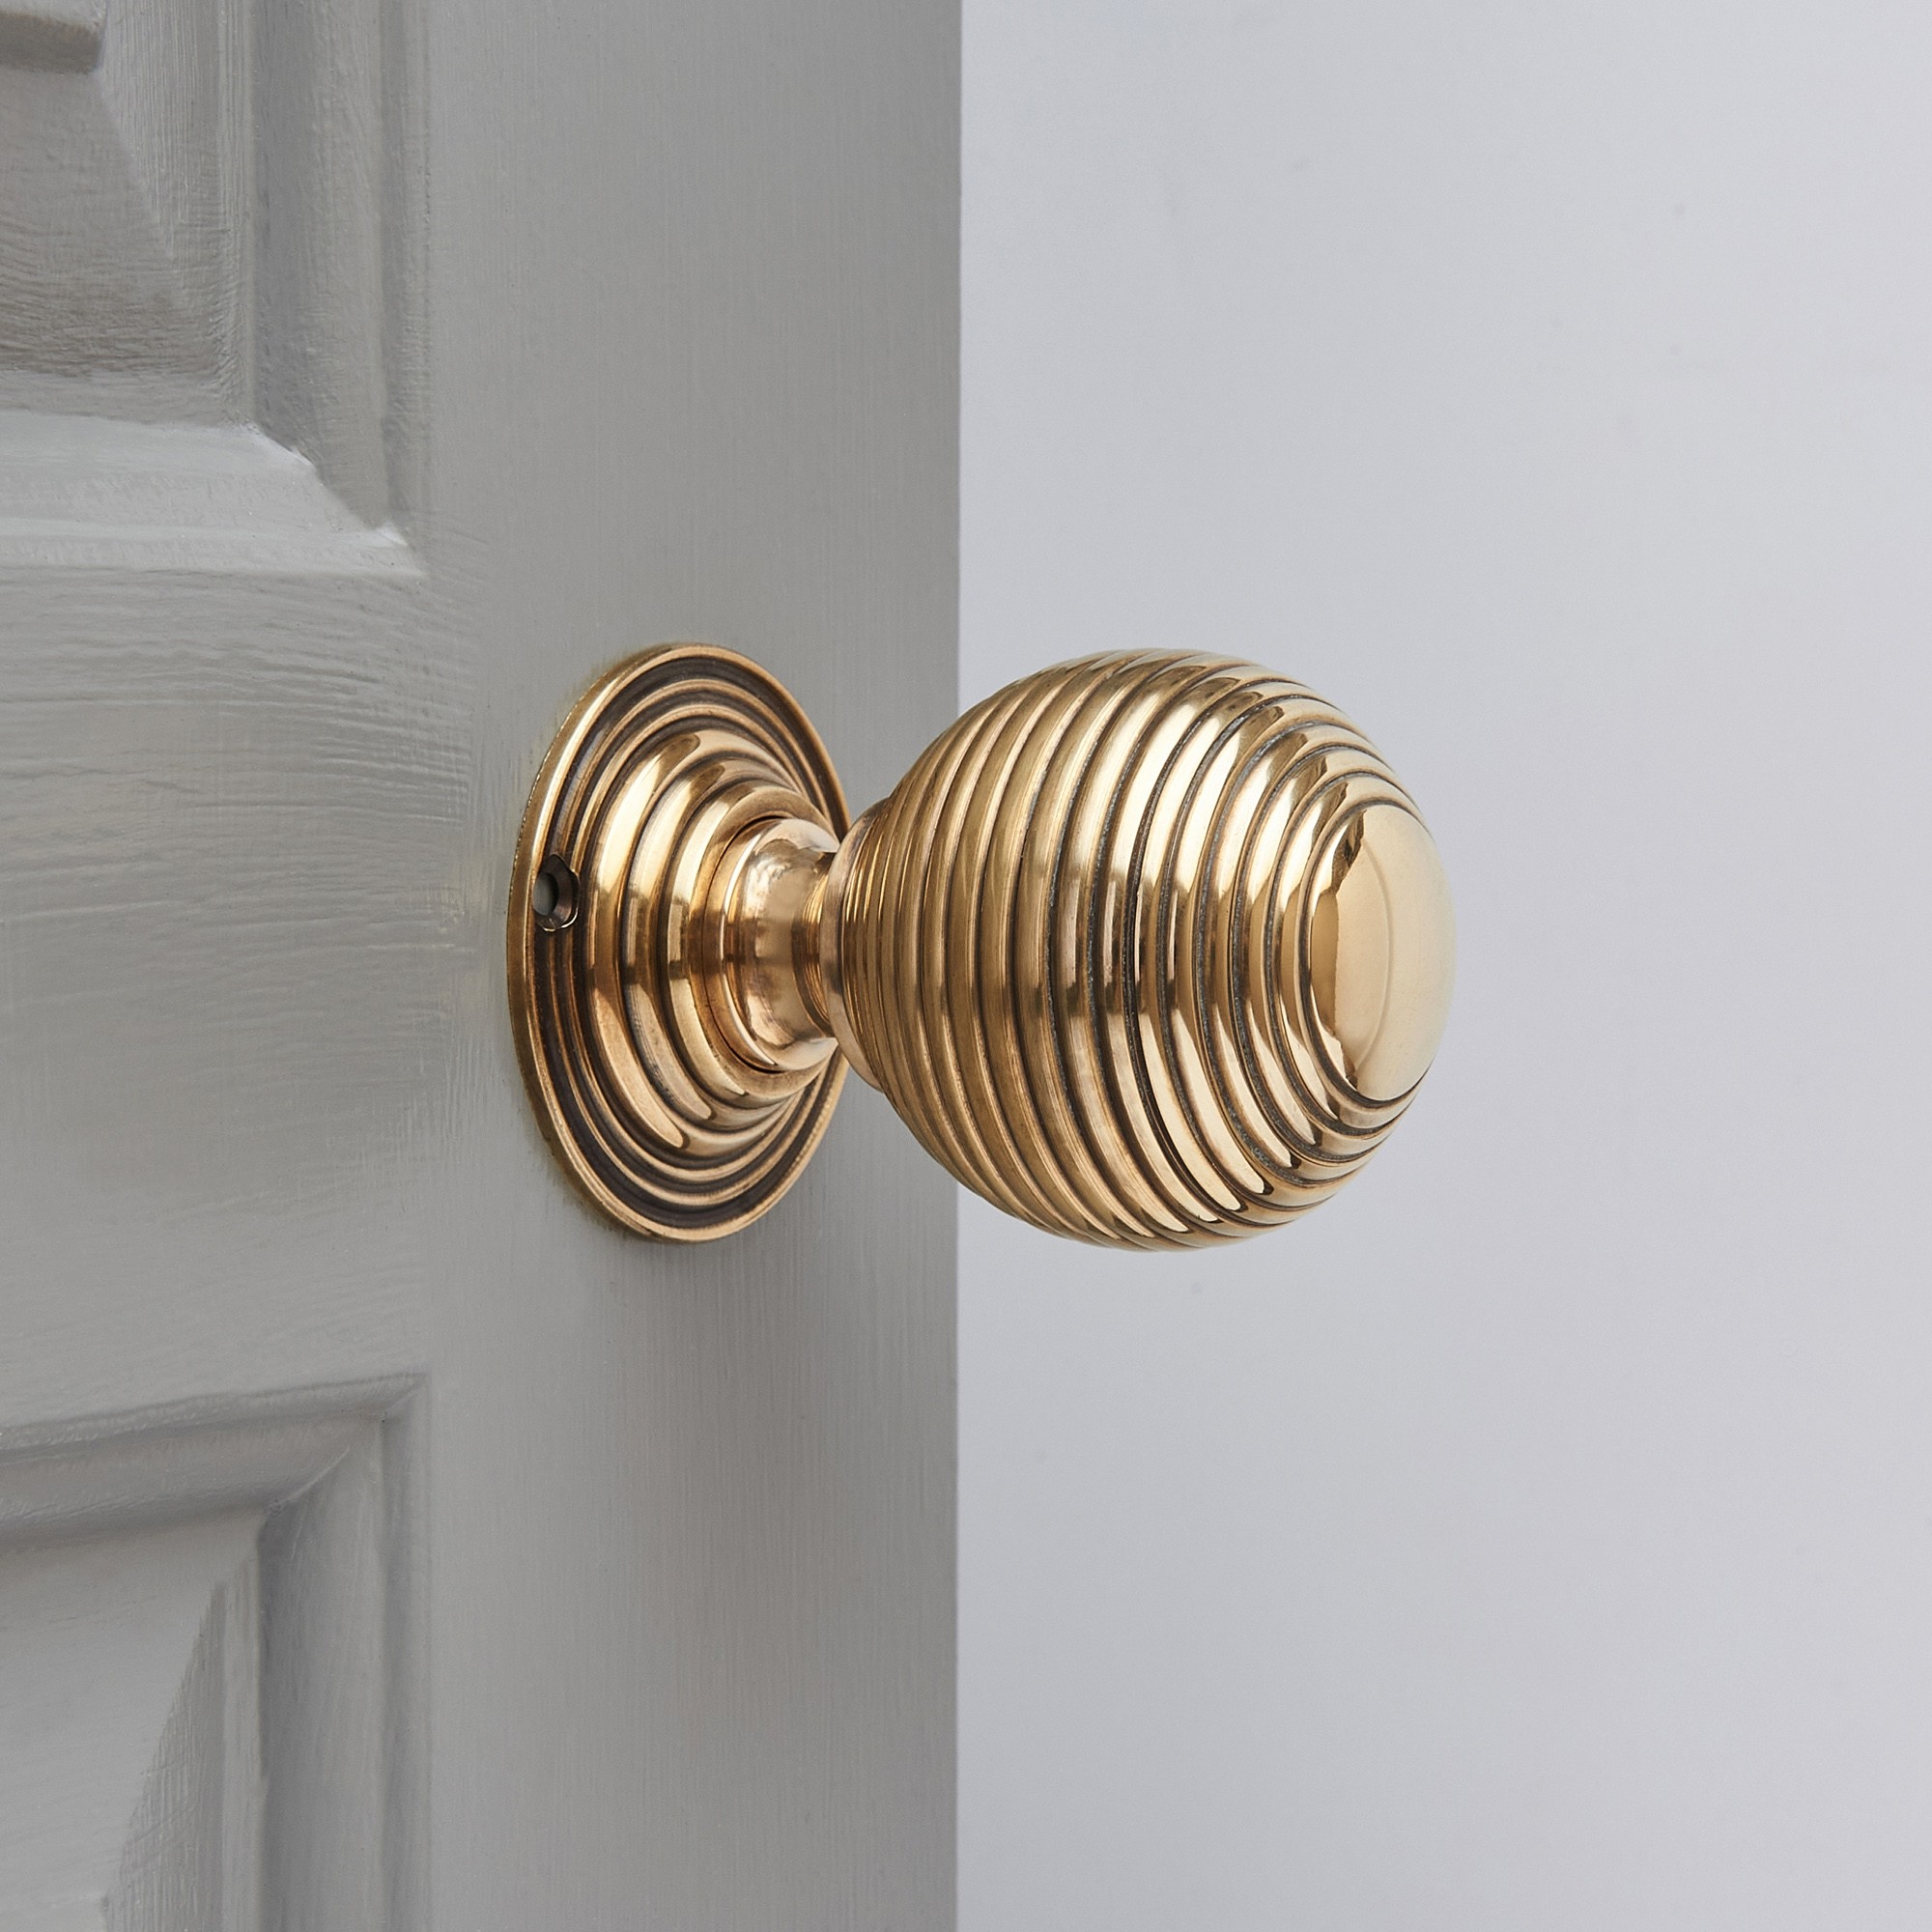 Large Beehive Aged Brass Door Knobs